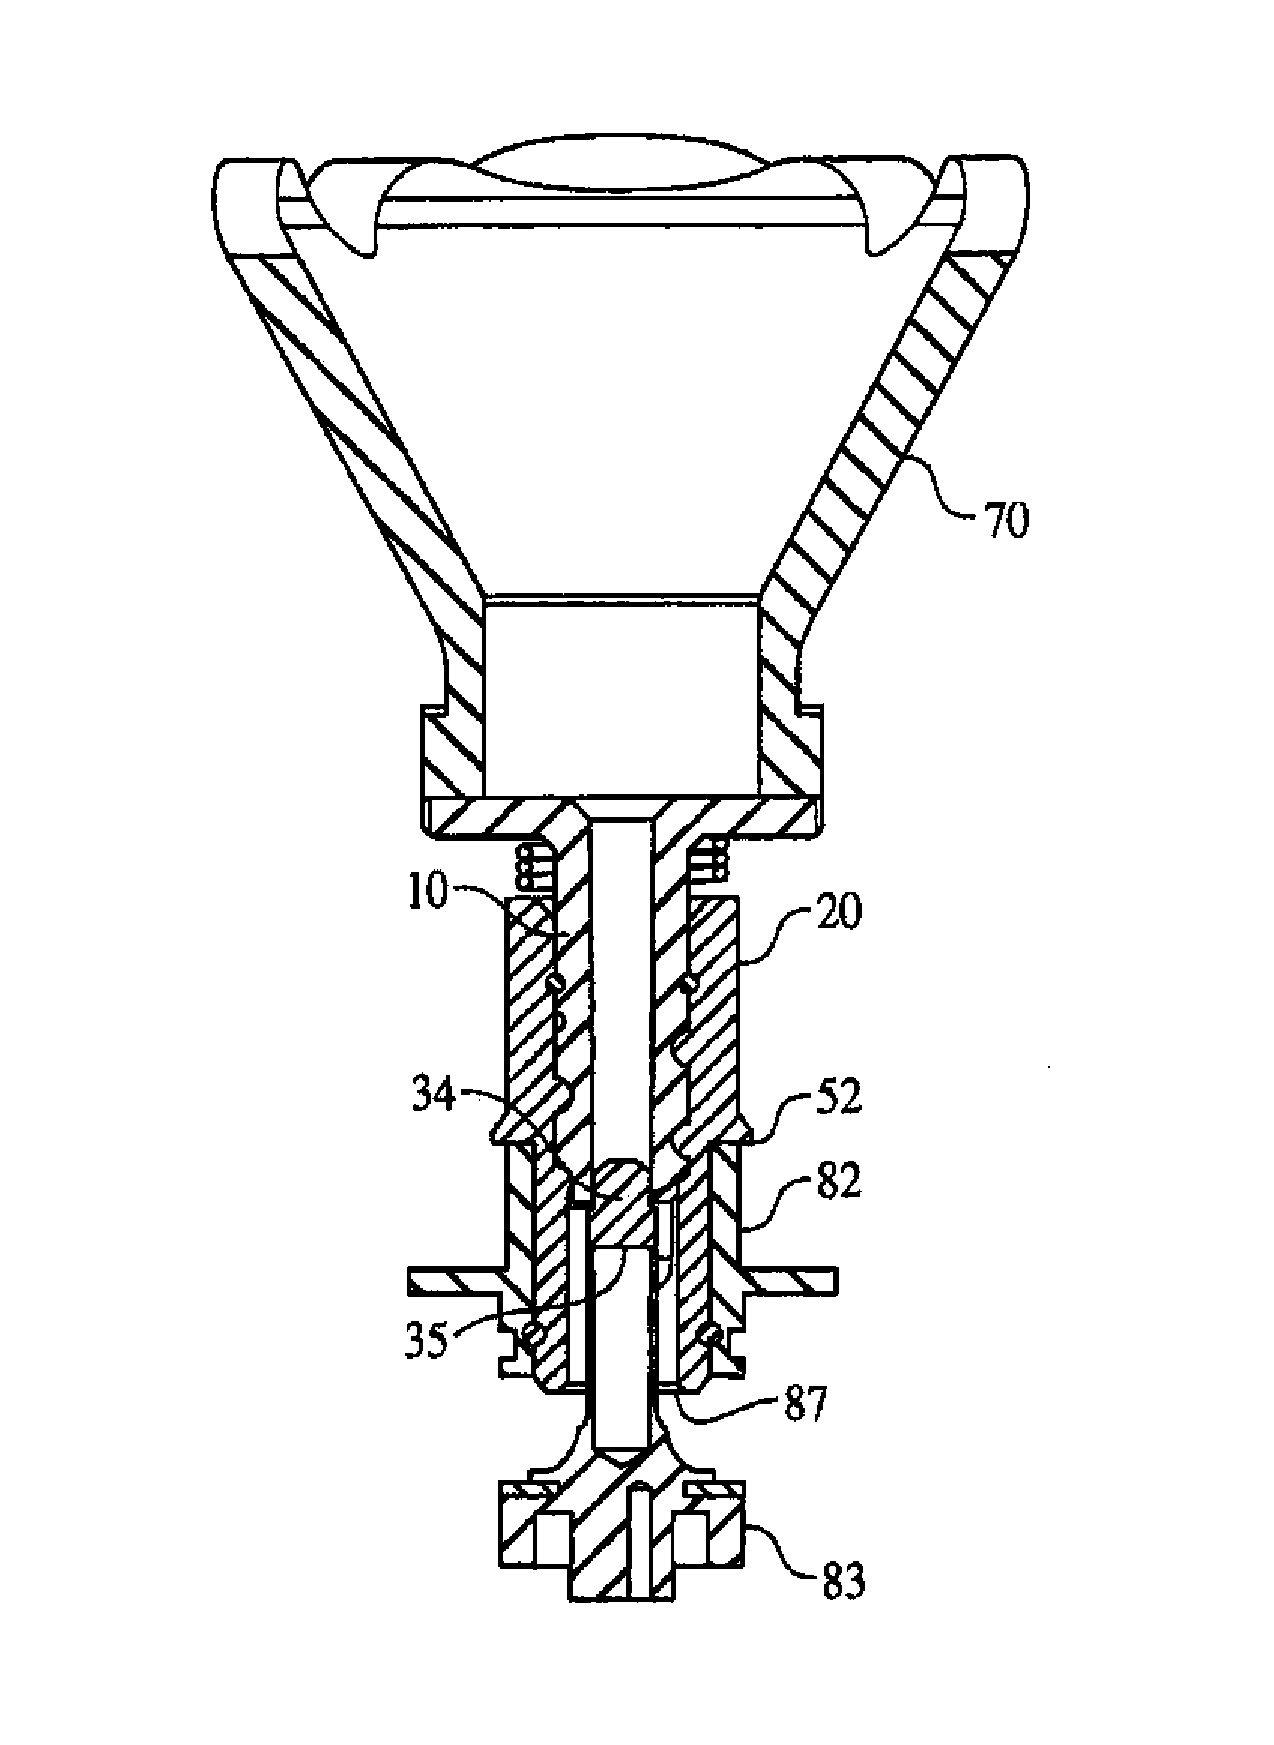 Smooth-sided outlet device for controlling anesthetic flow in vaporizer with plunger